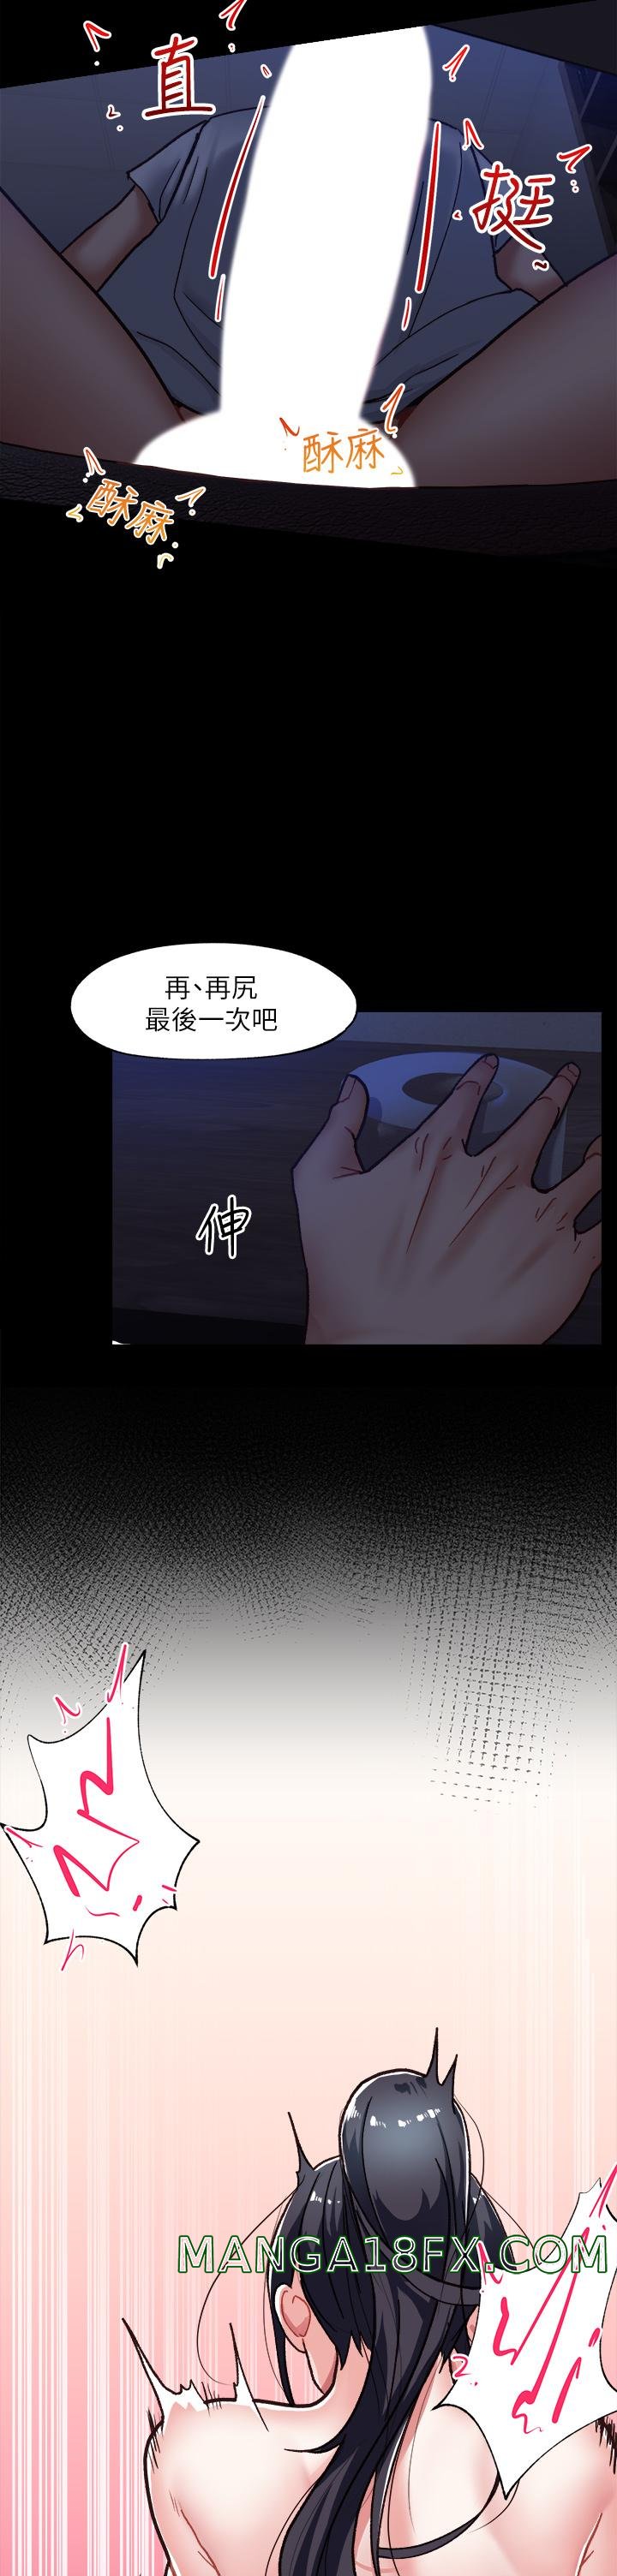 Absolute Hypnosis in Another World Raw - Chapter 1 Page 6